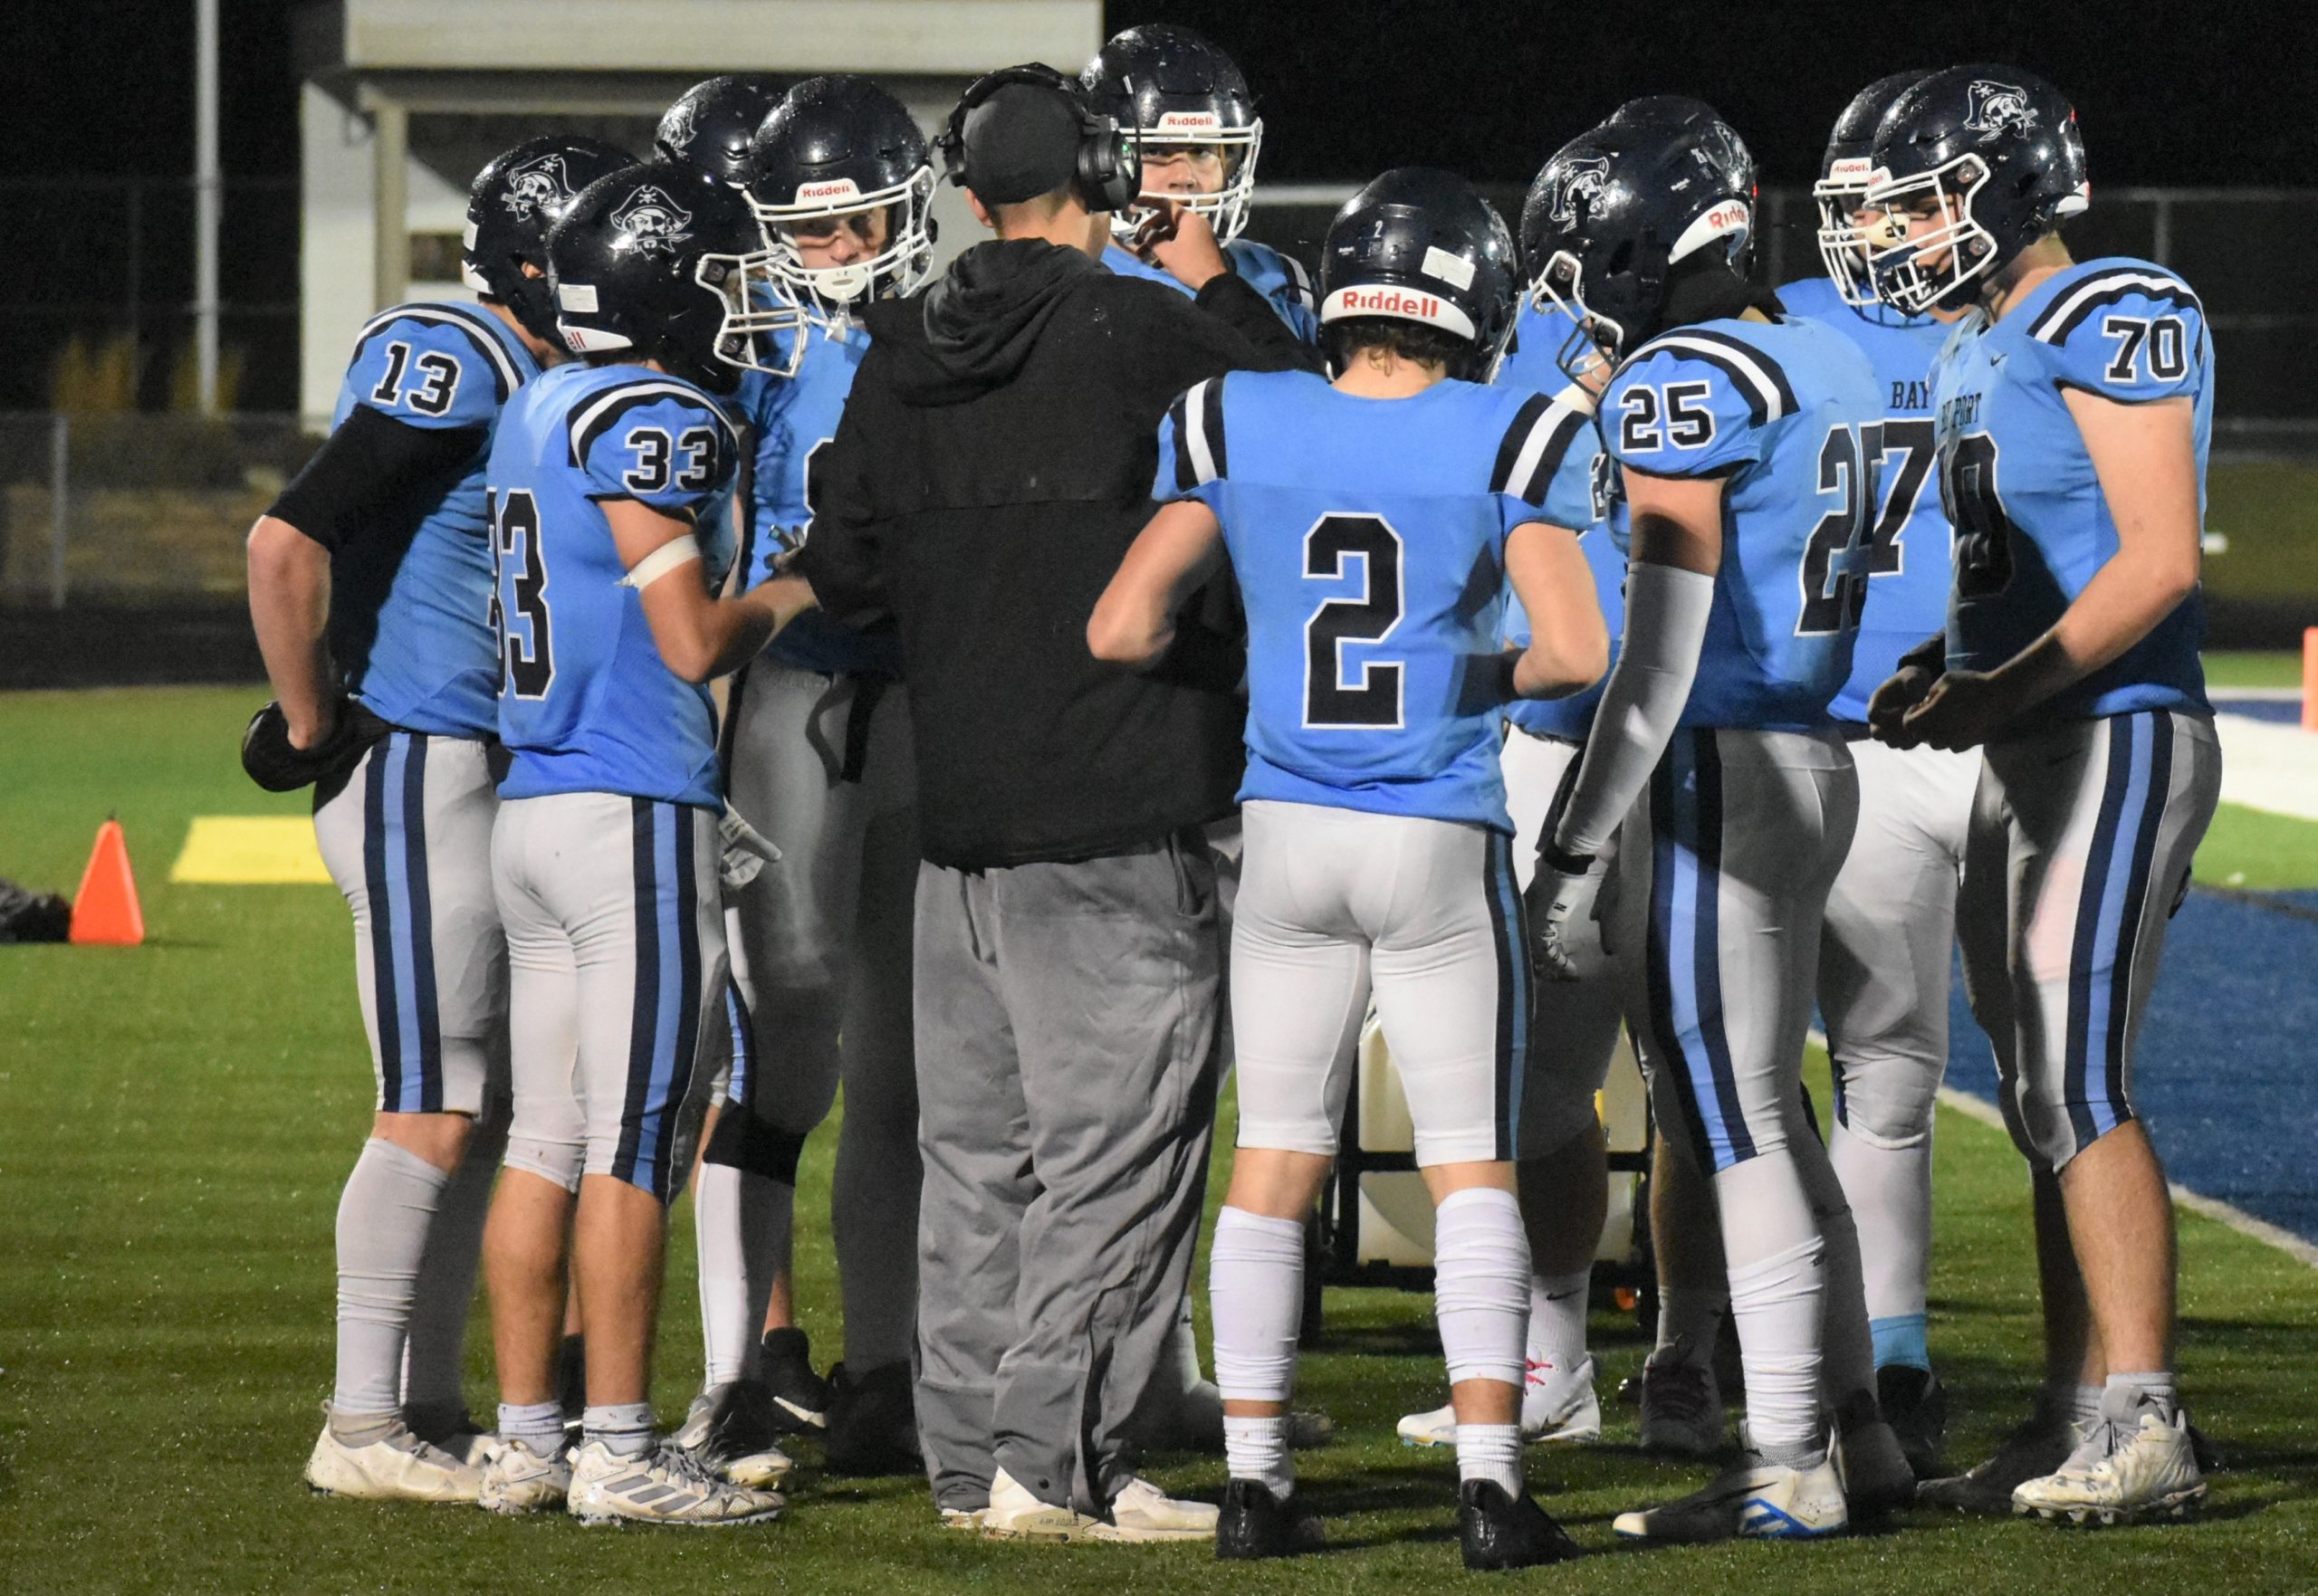 LEVEL 3 PLAYOFFS: Bay Port holds on to beat Appleton North